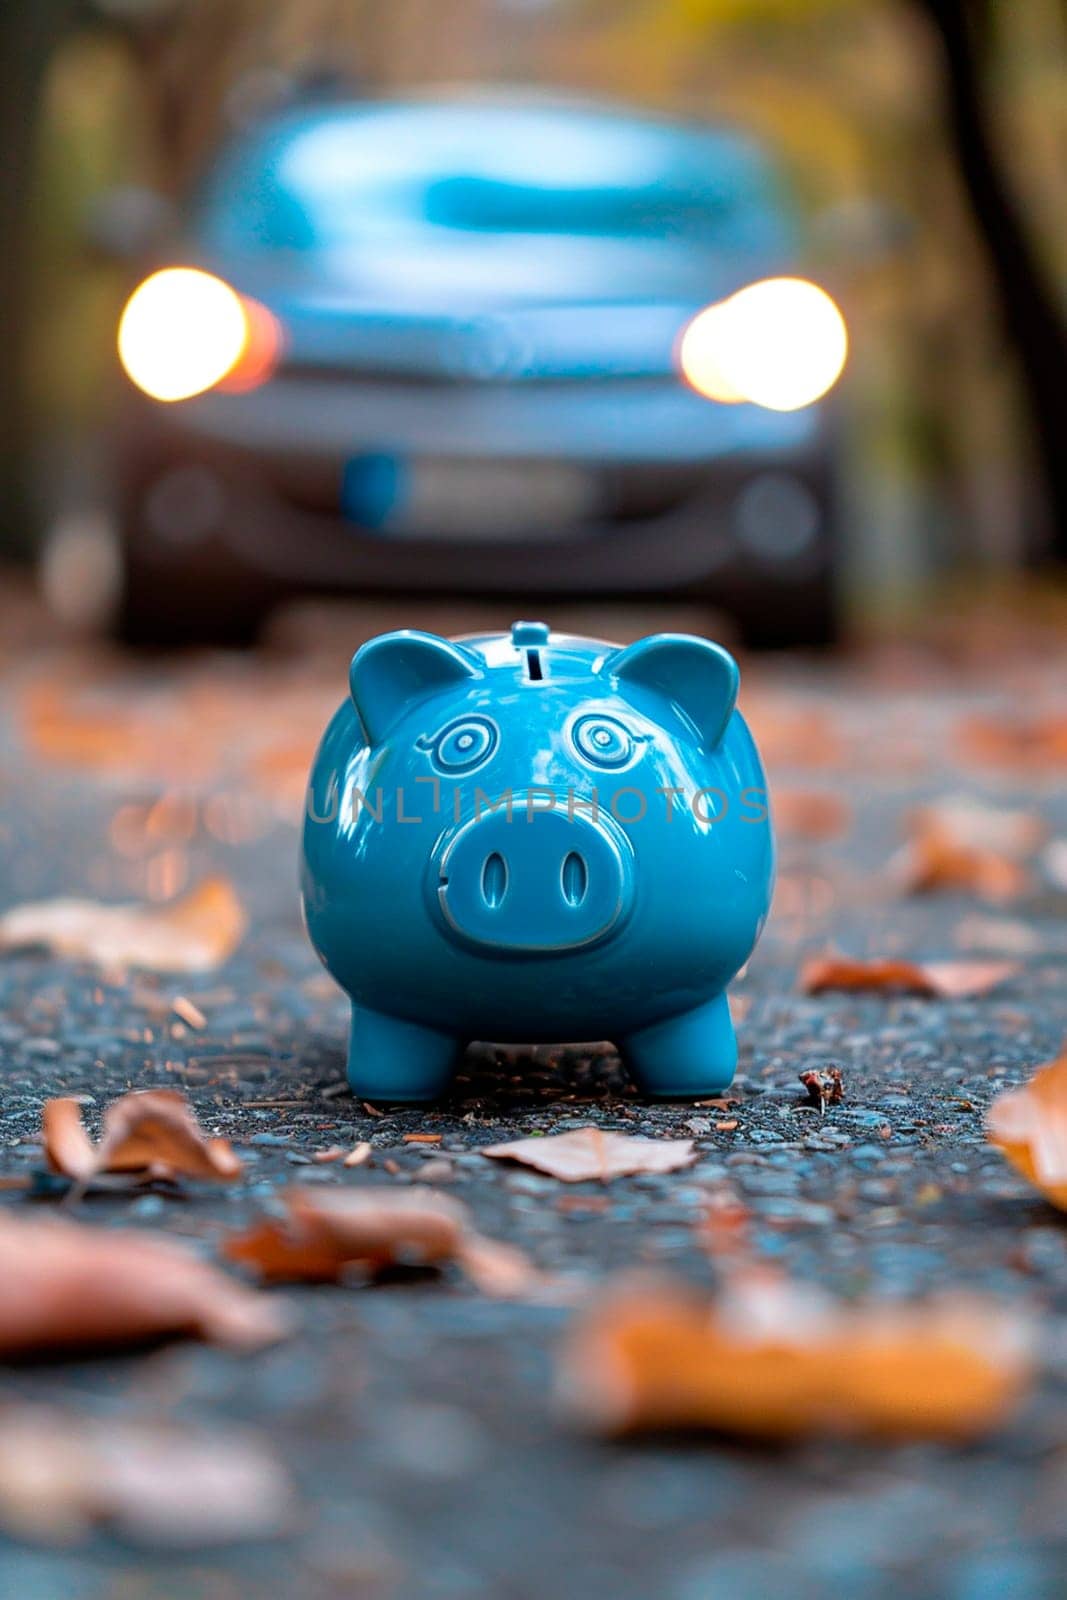 Piggy bank on the background of a car. Selective focus. by yanadjana